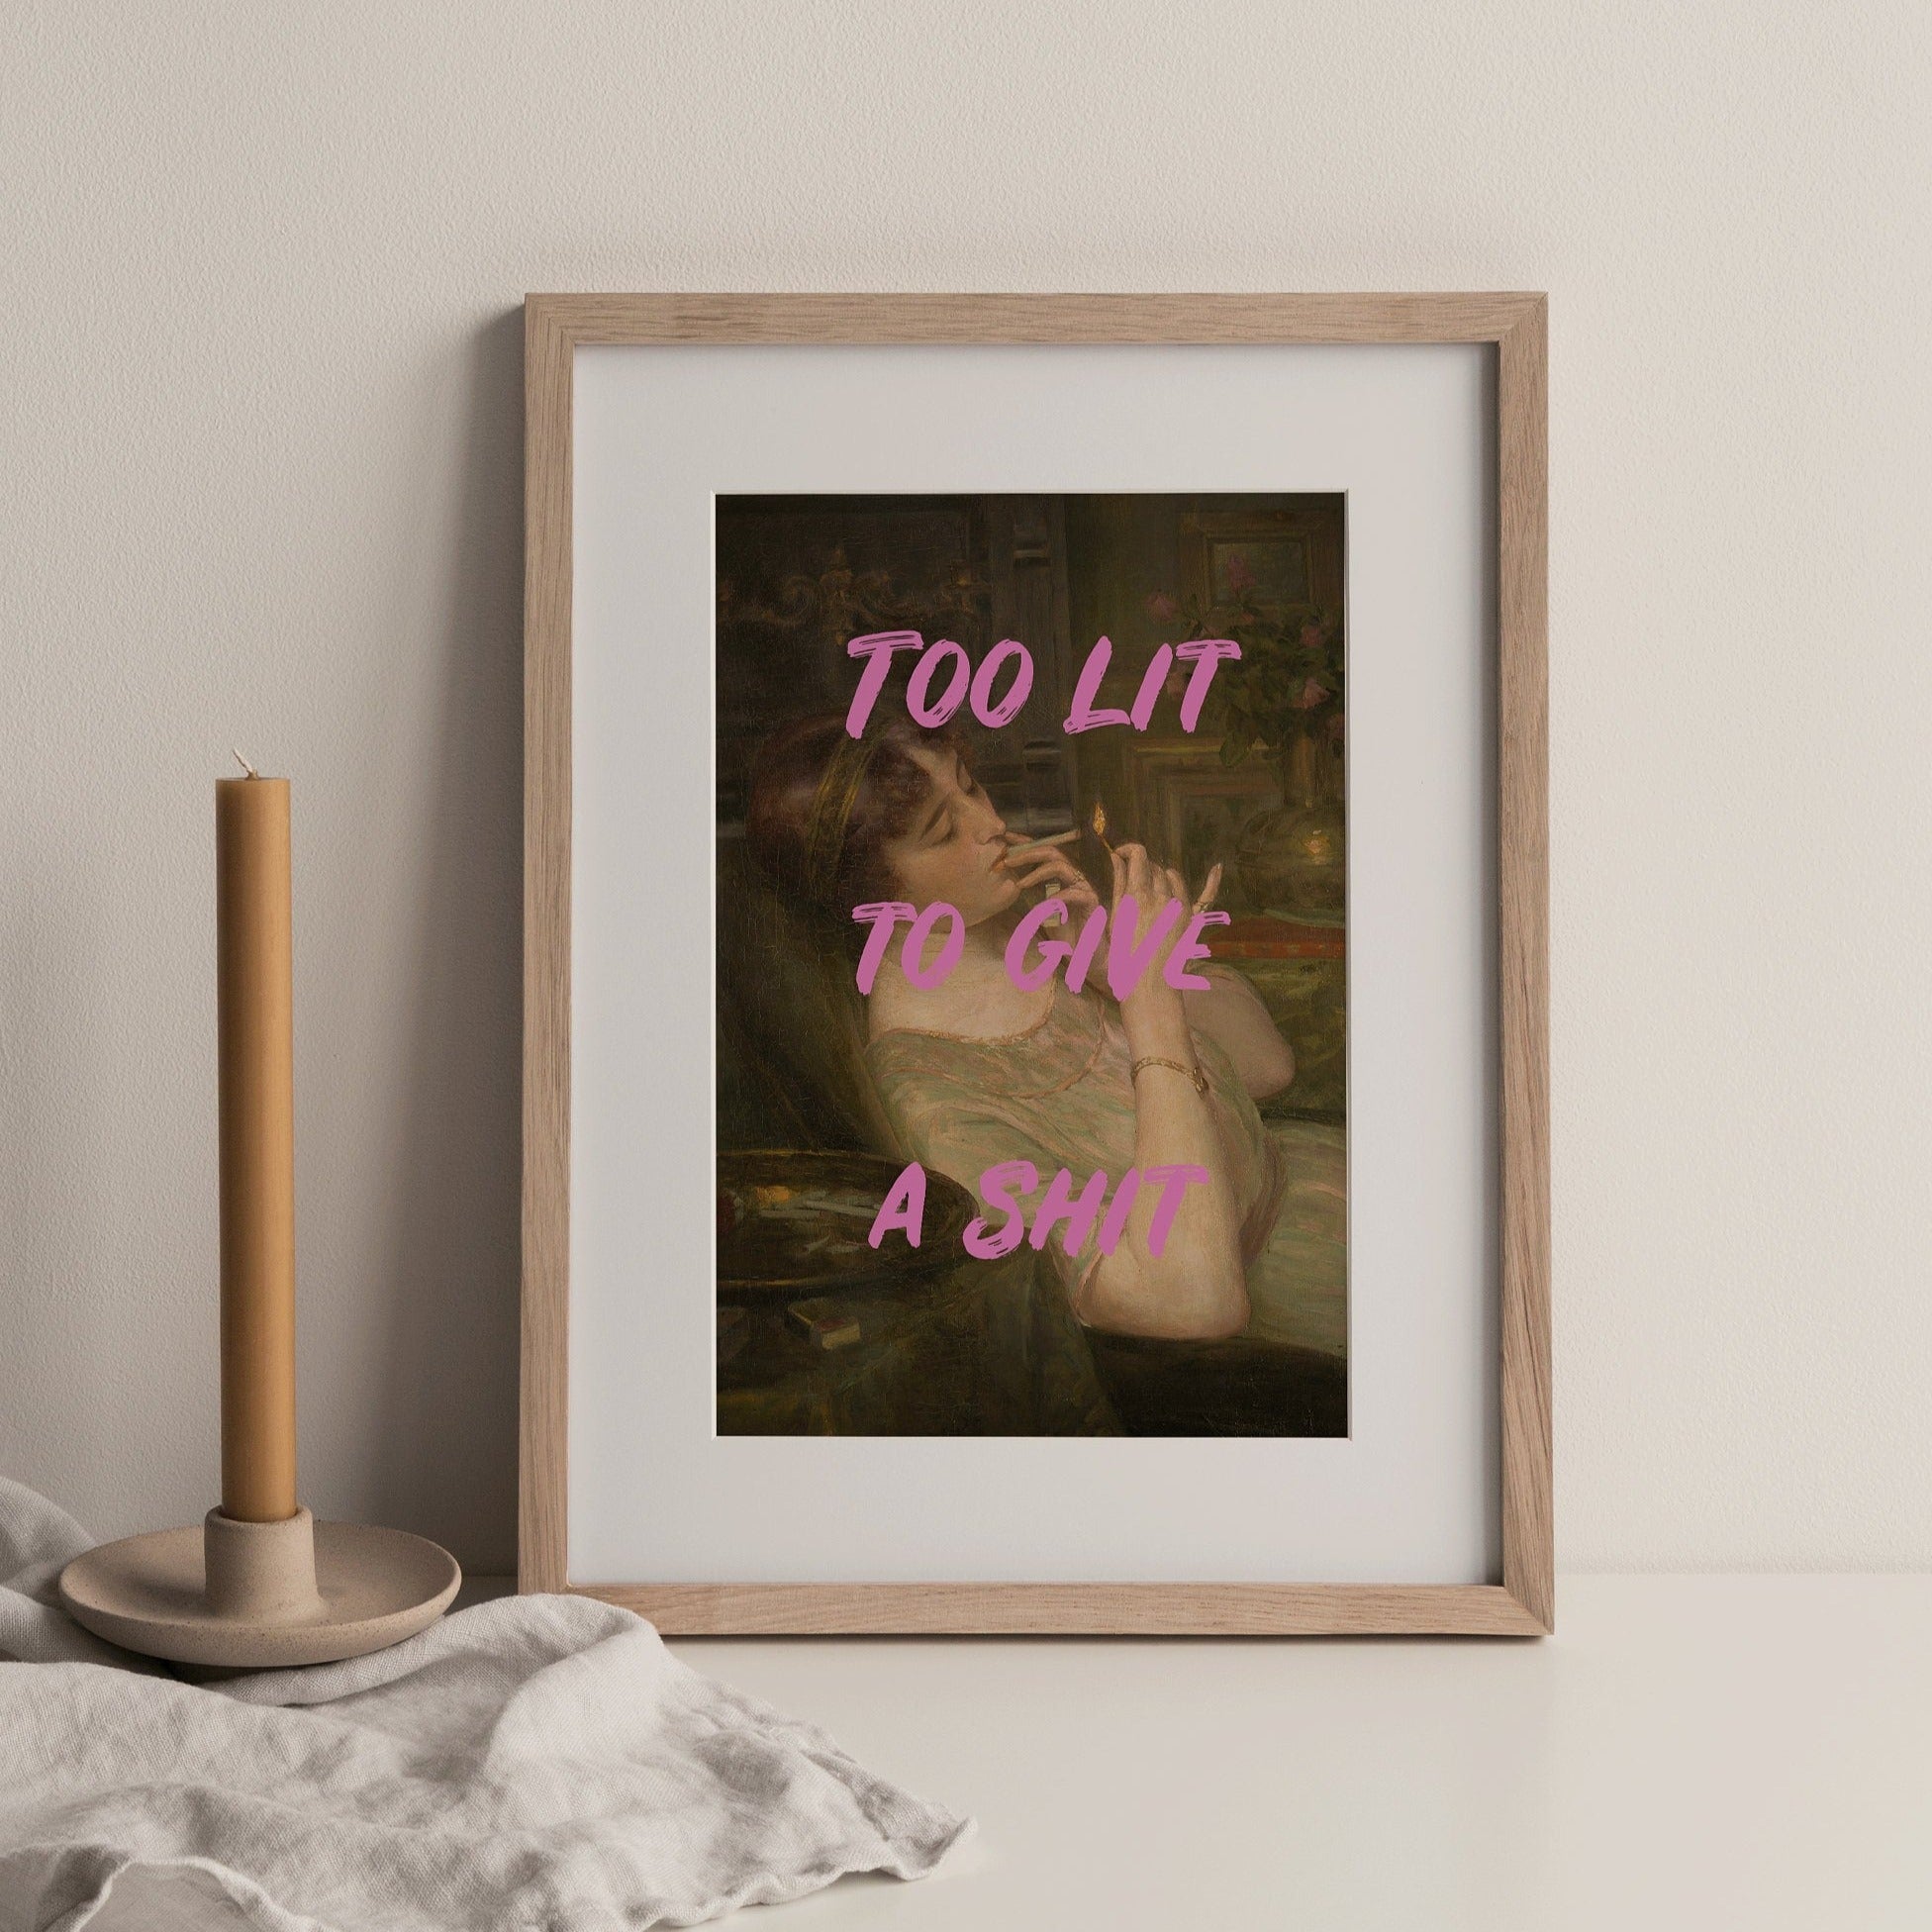 Altered ART PRINT, Too Lit to Give a Shit Poster, Altered Vintage Art, Renaissance Portrait, Quote Art Print, Large Wall Print, UNFRAMED